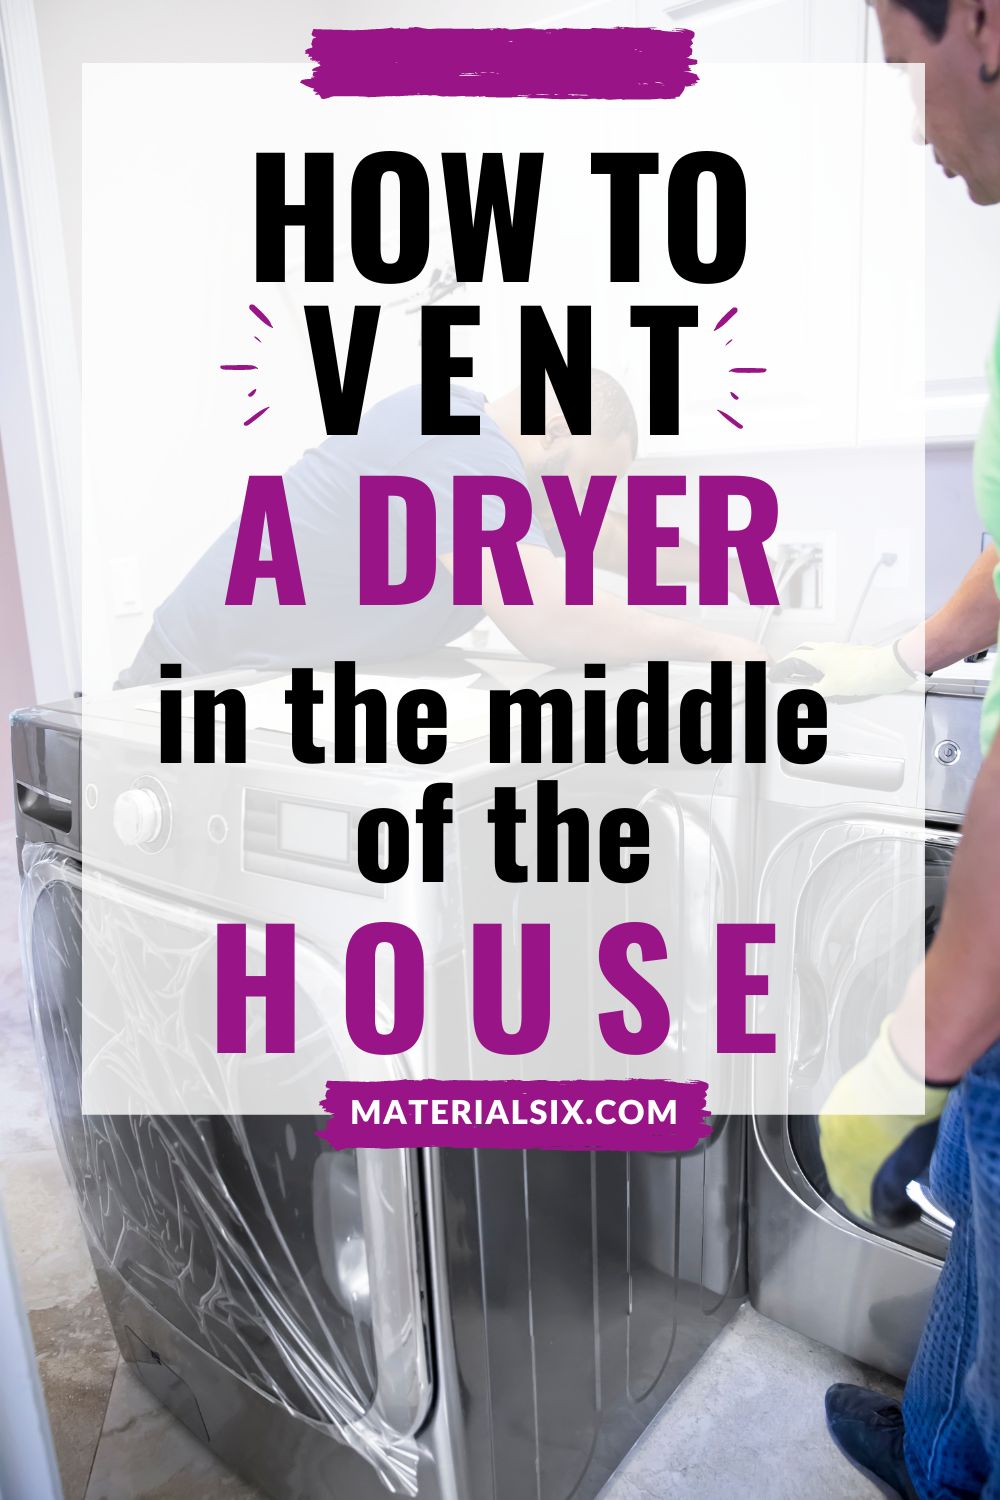 How to Vent a Dryer in the Middle of the House (Expert Tips)